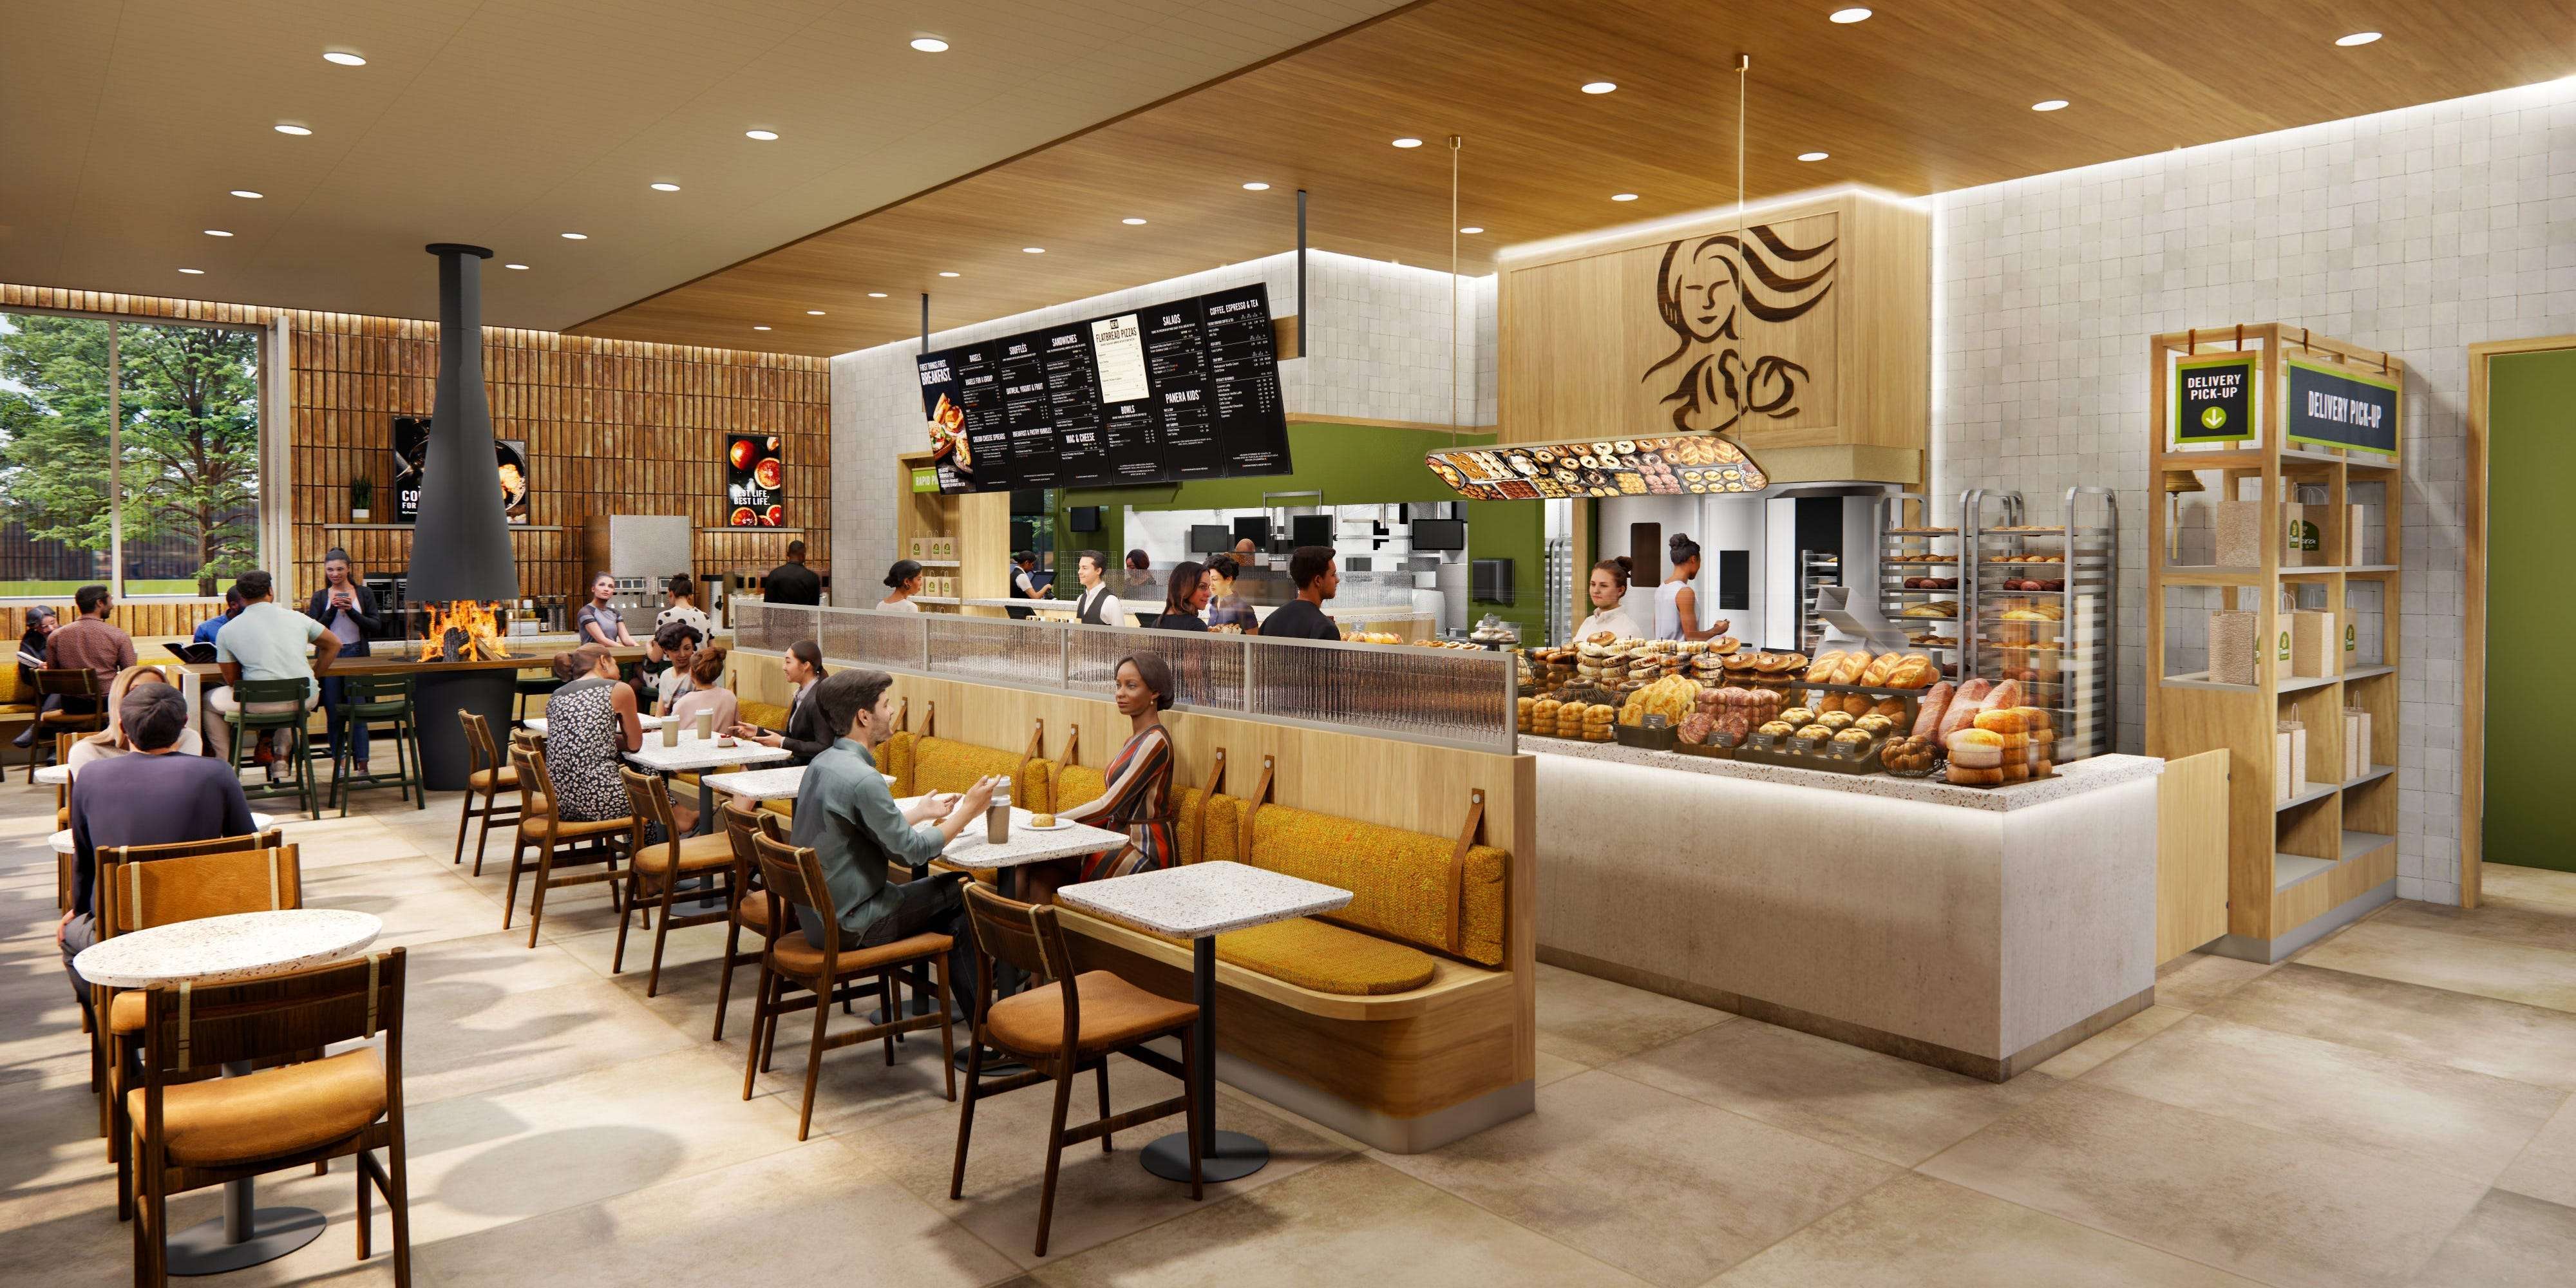 Panera Bread unveiled an overhauled design for all its new stores. They